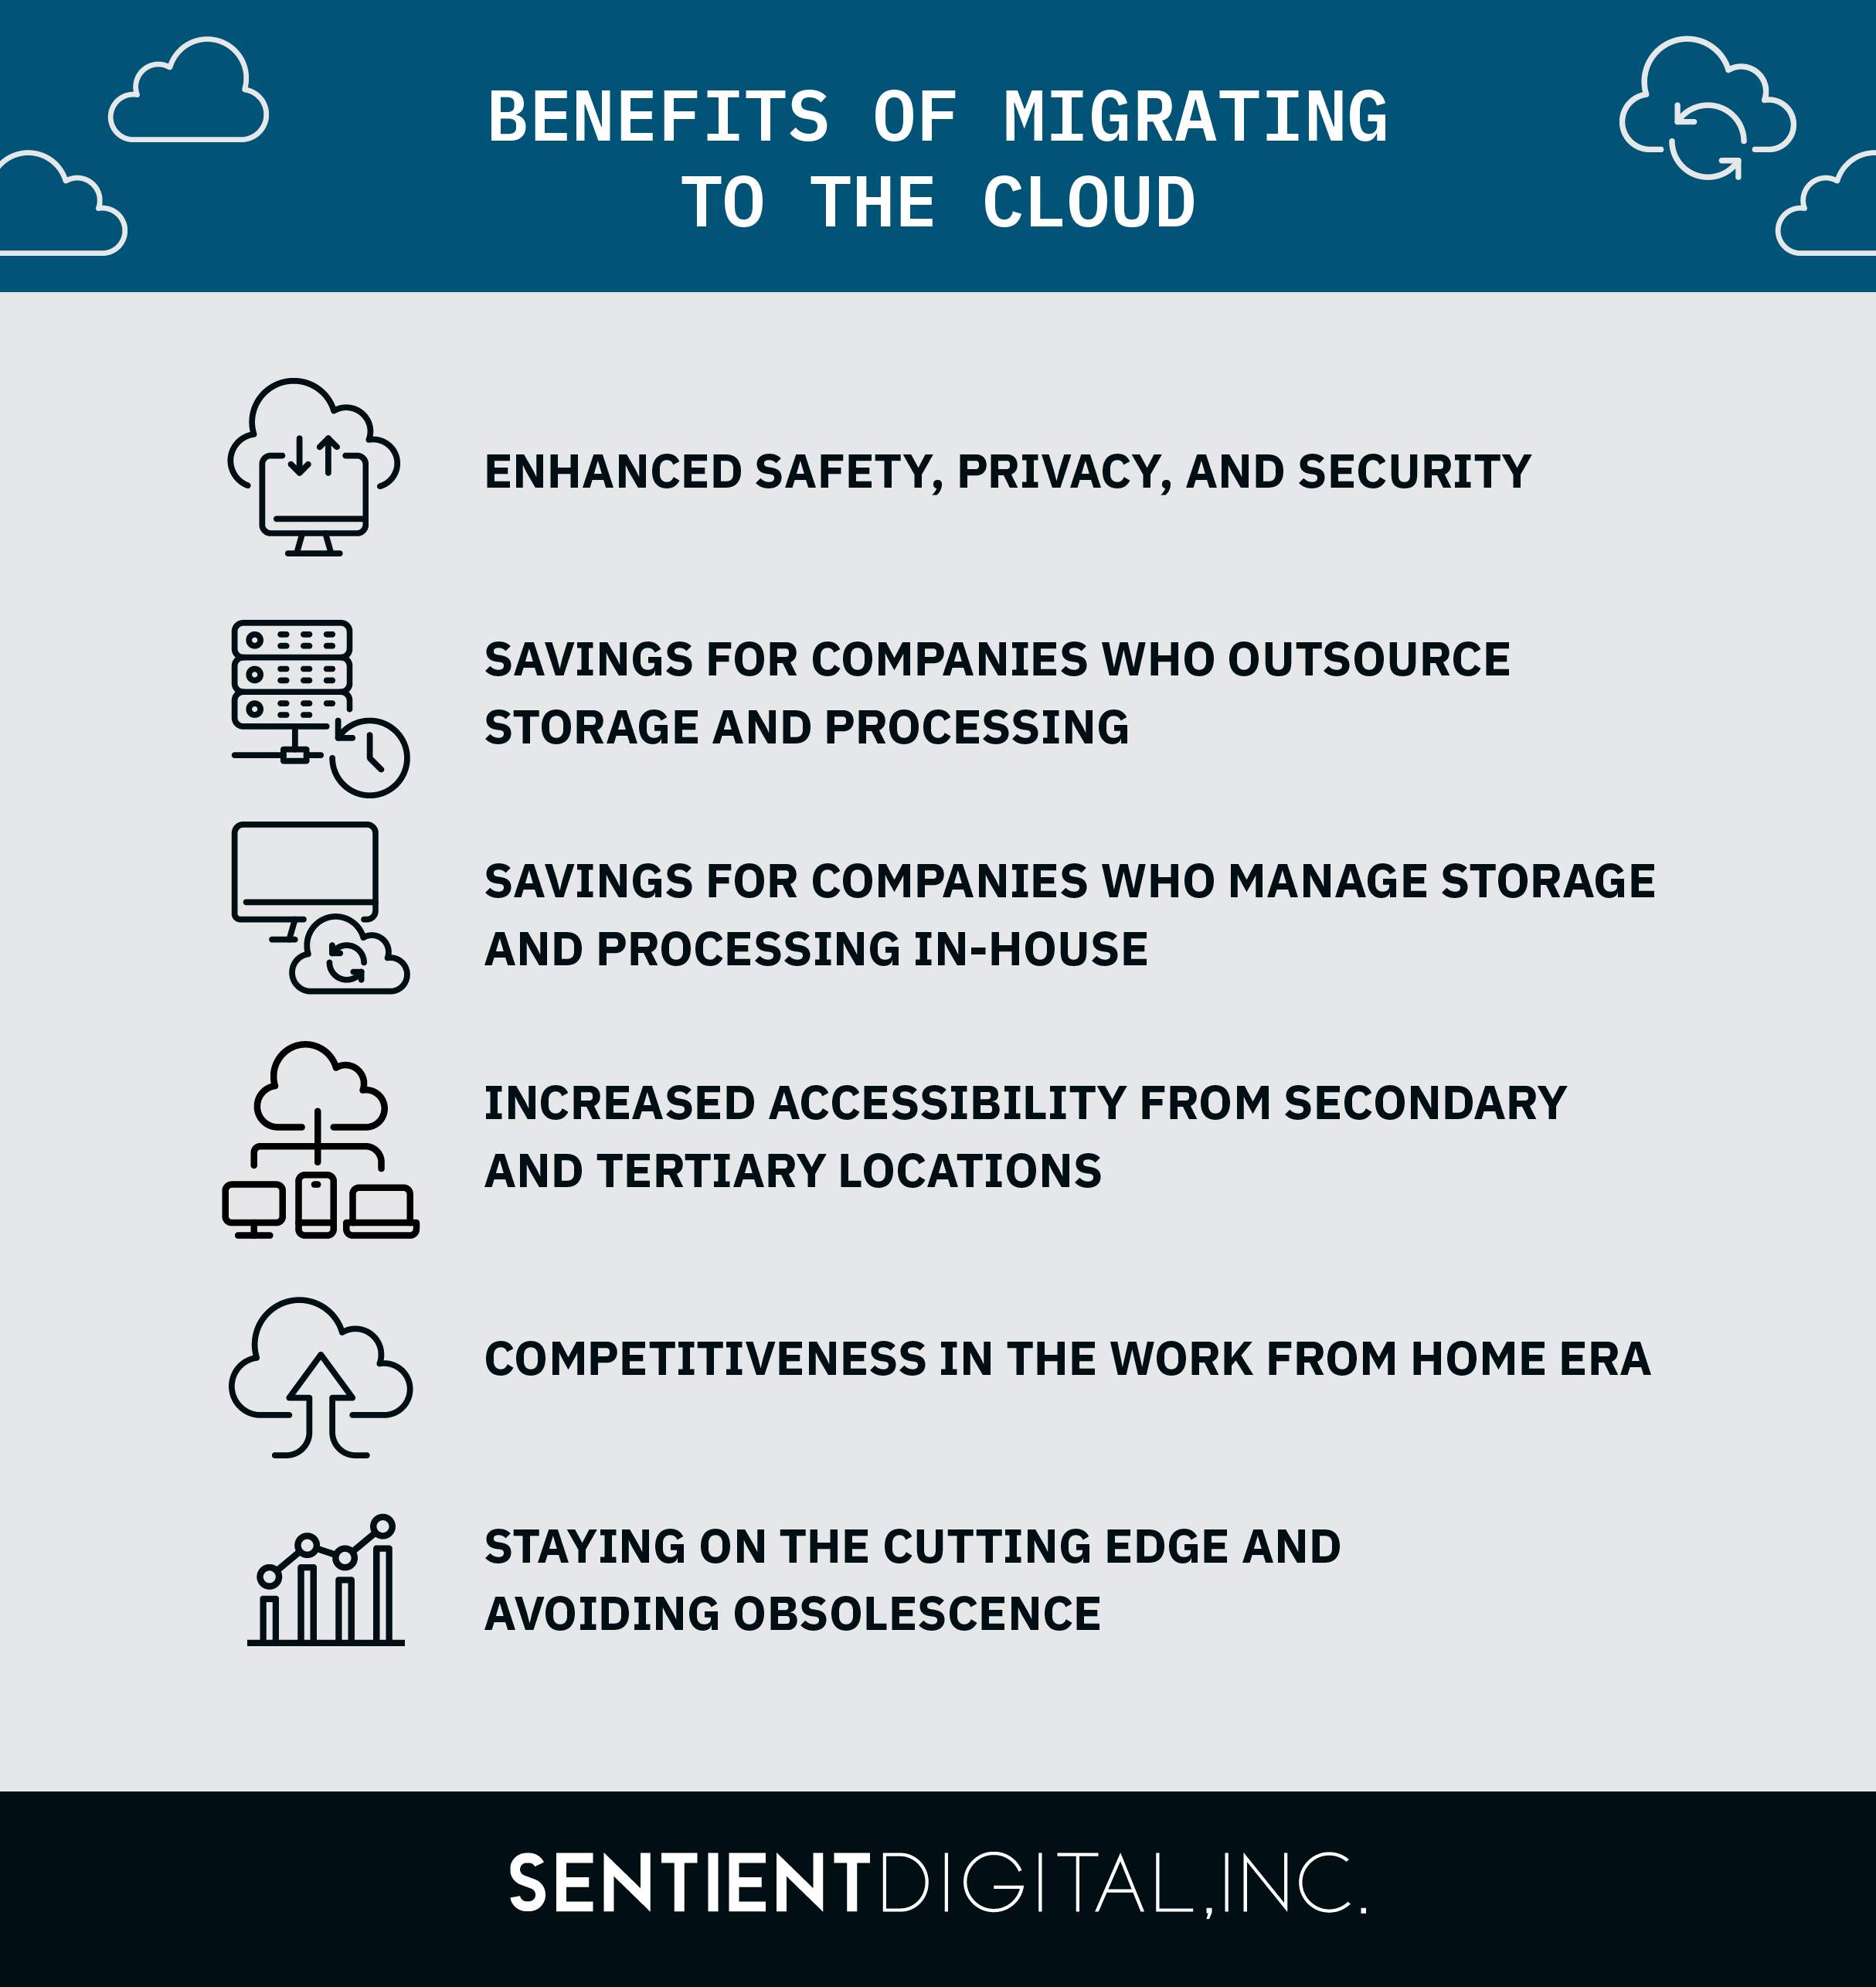 Check out this infographic or keep reading to learn about 6 benefits of migrating to the cloud.